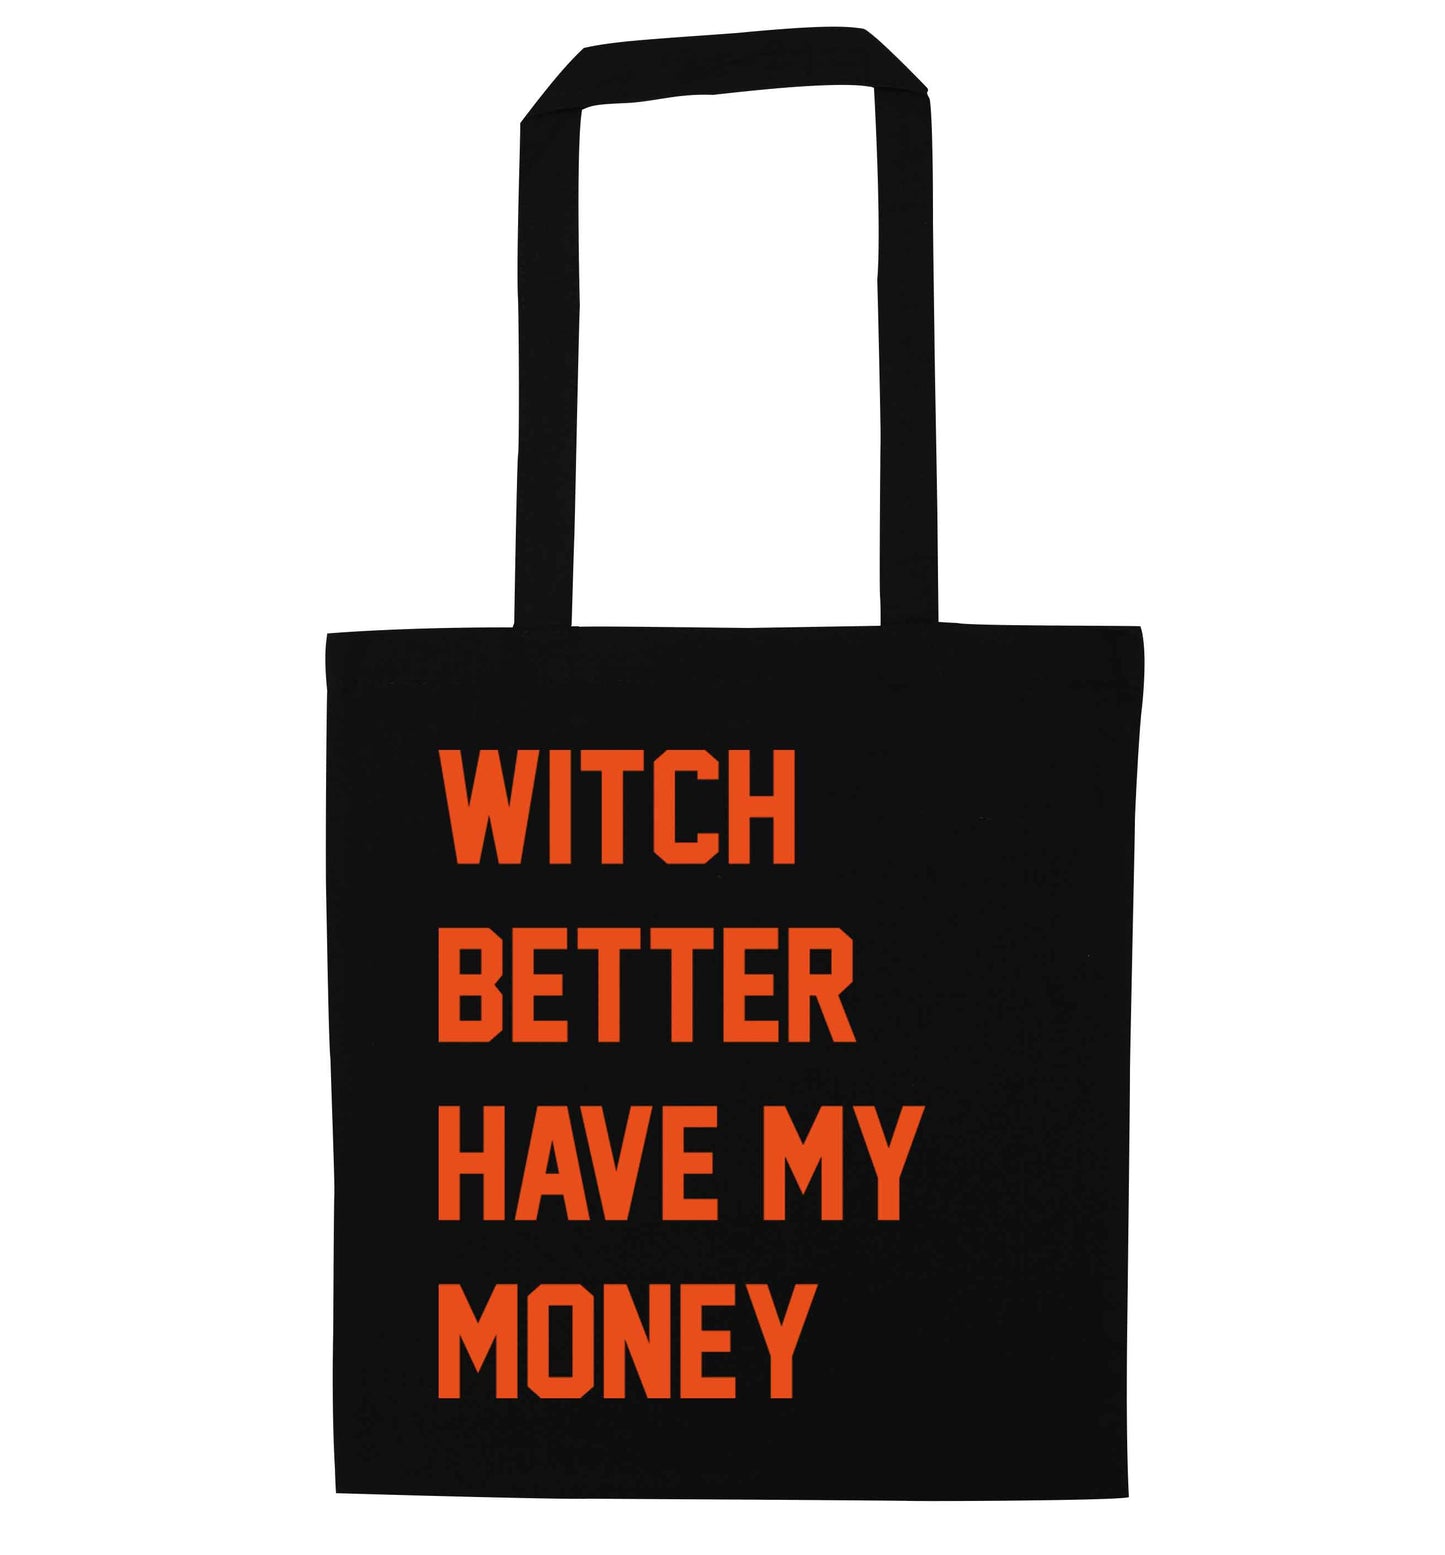 Witch better have my money black tote bag